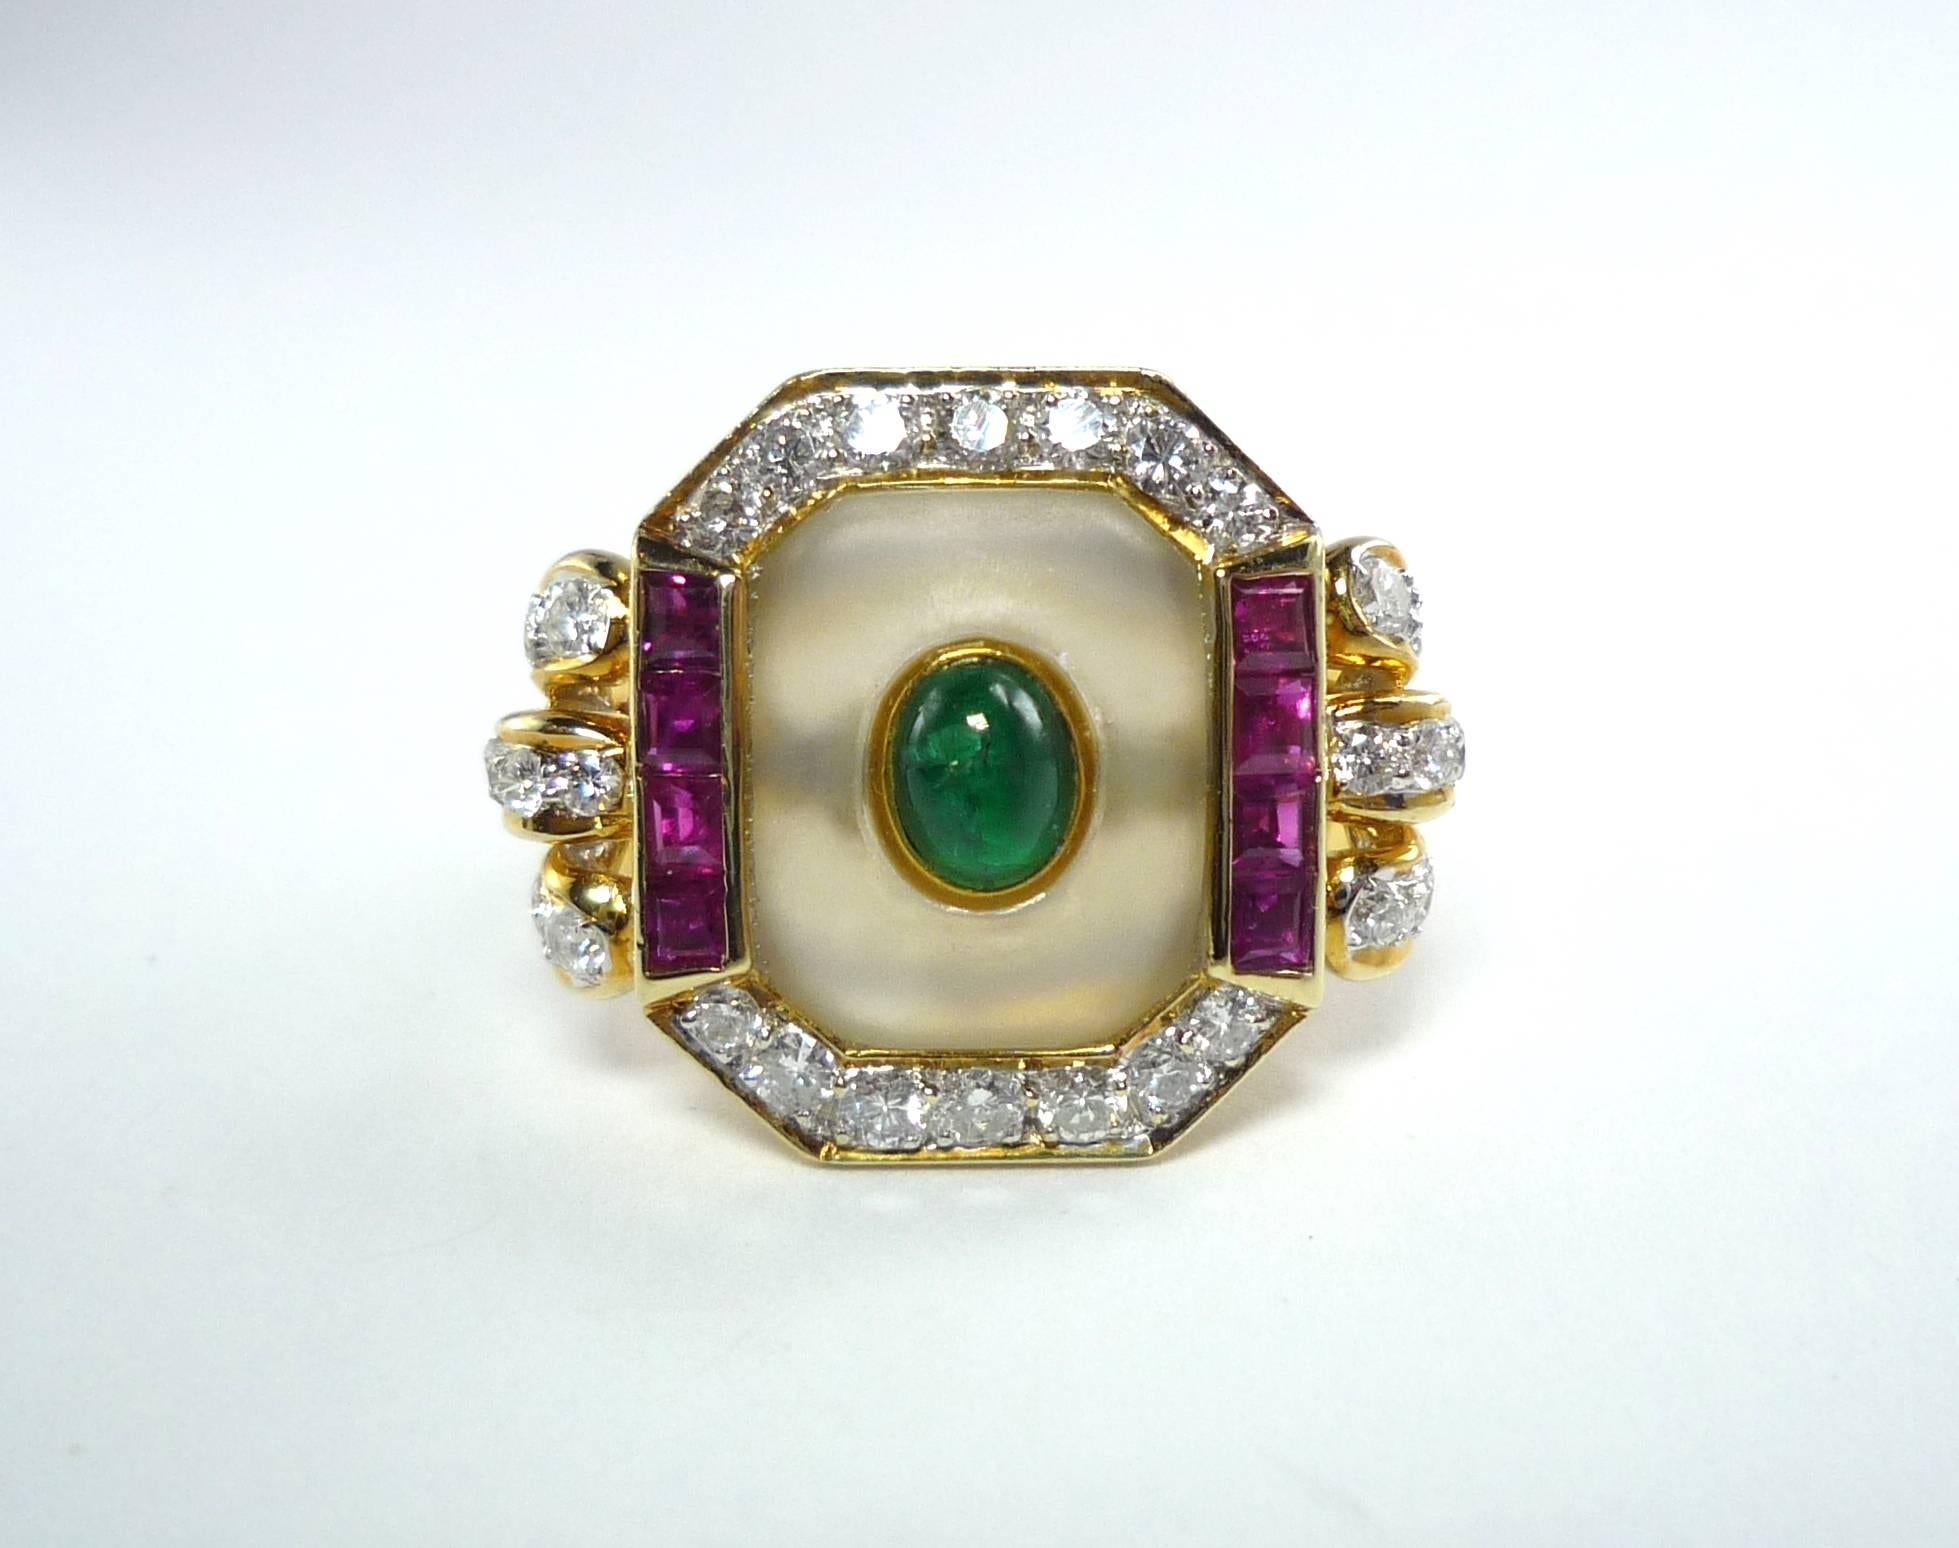 The Emerald Cabochon is surrounded by a mattered Rock Crystal, 
8 Rubys and 28 Diamonds, approx. 0.50 ct., 

Ringsize US 6,5, EU 54